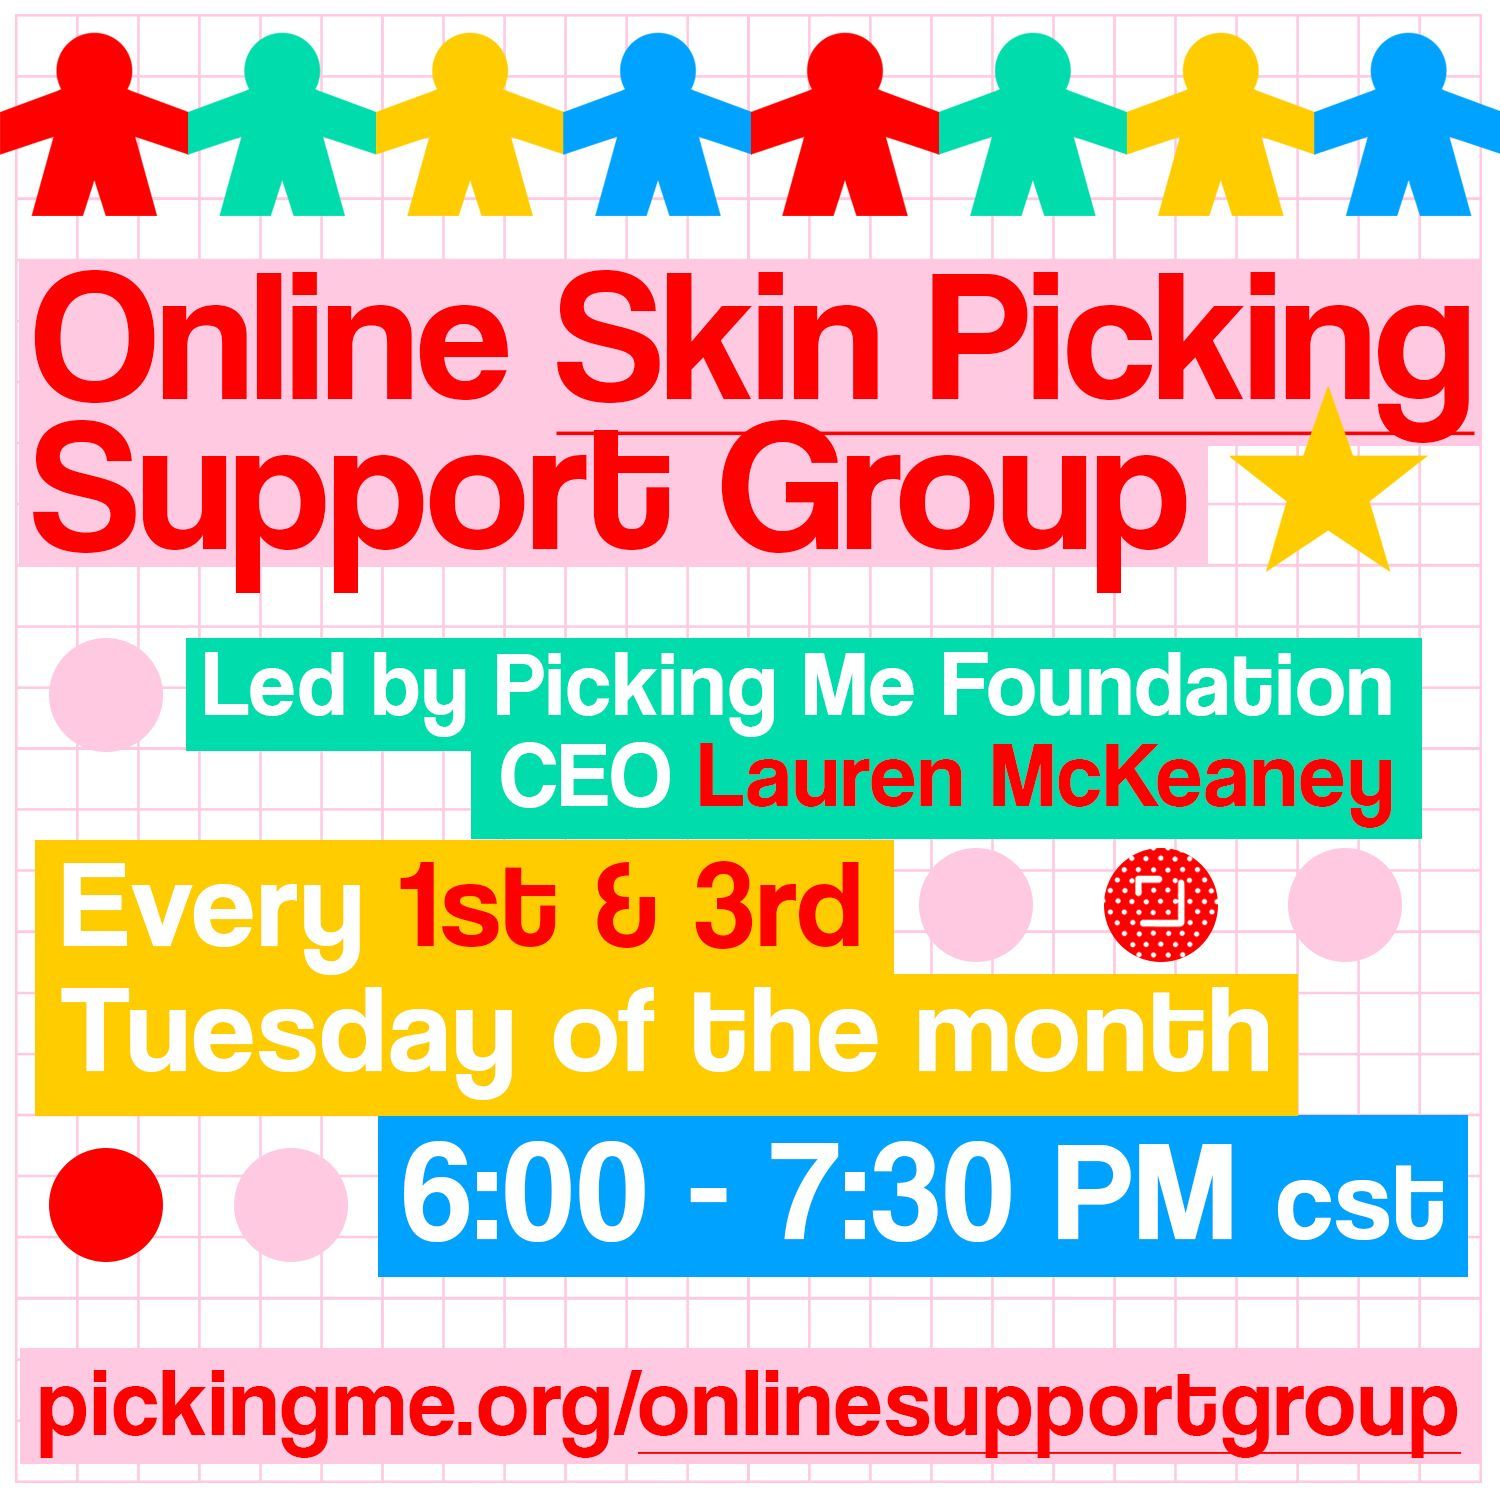 Online Skin Picking Support Group